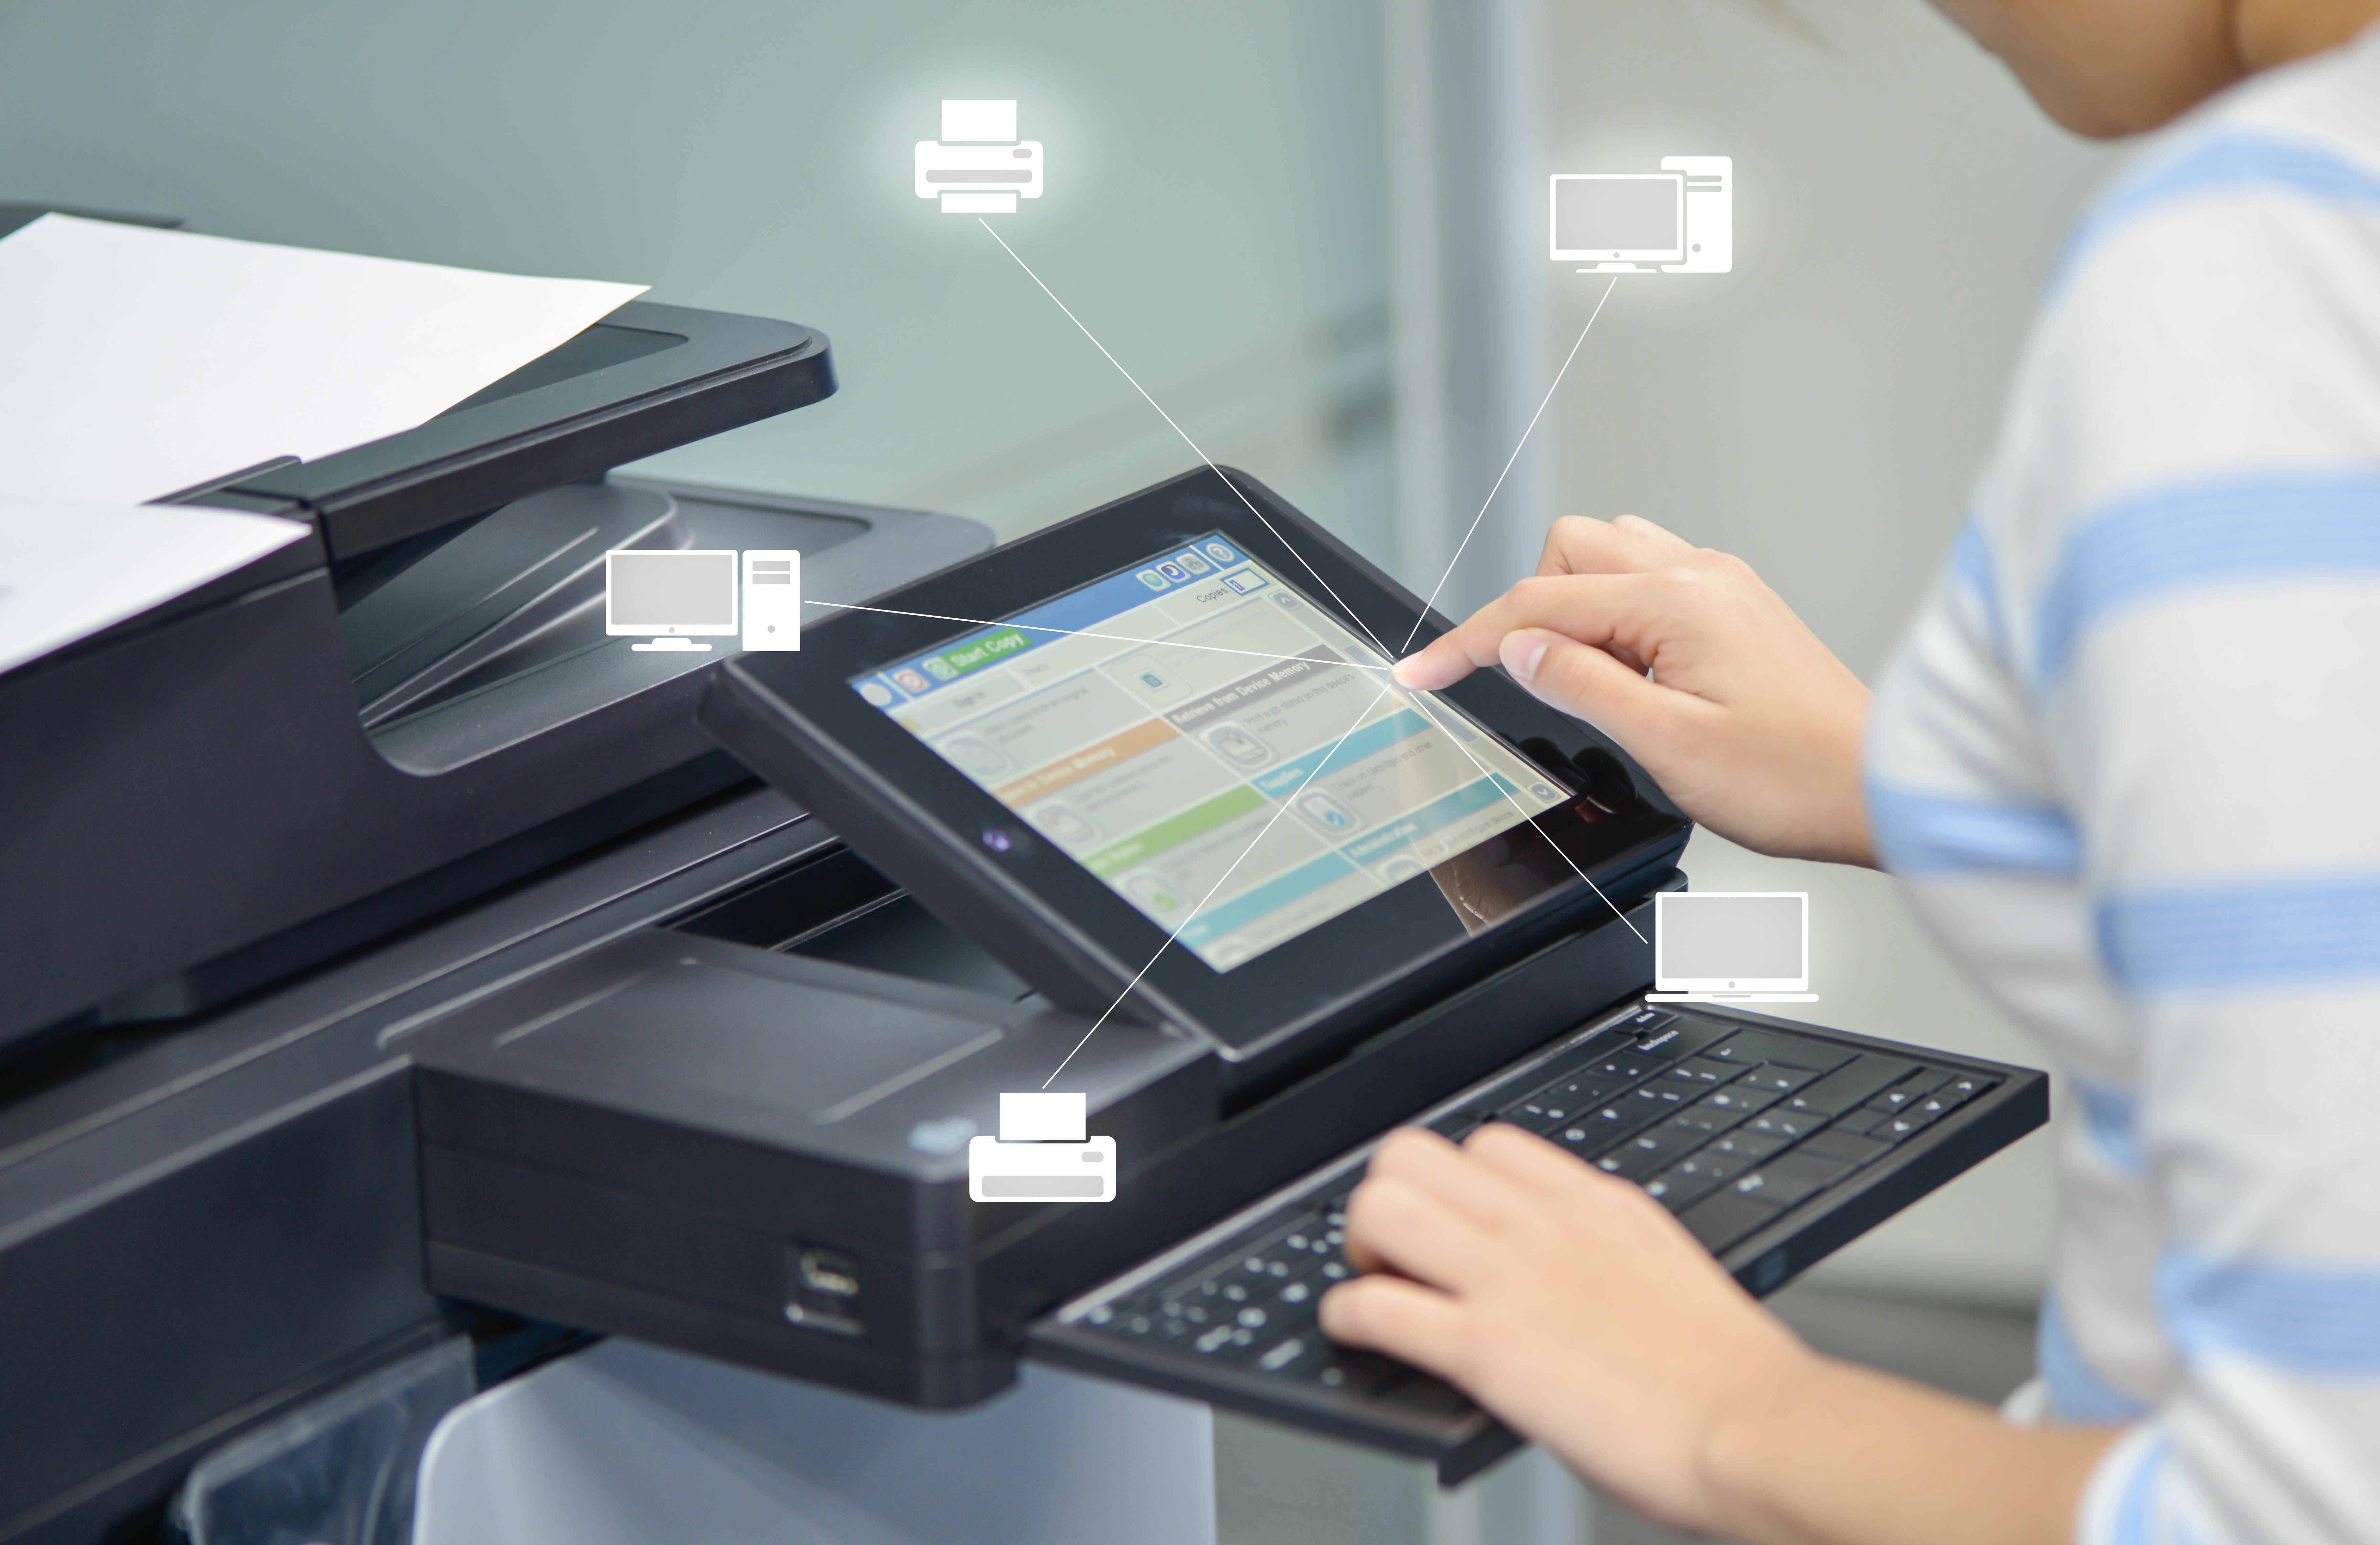 Why Managed Print Services for Higher Education?